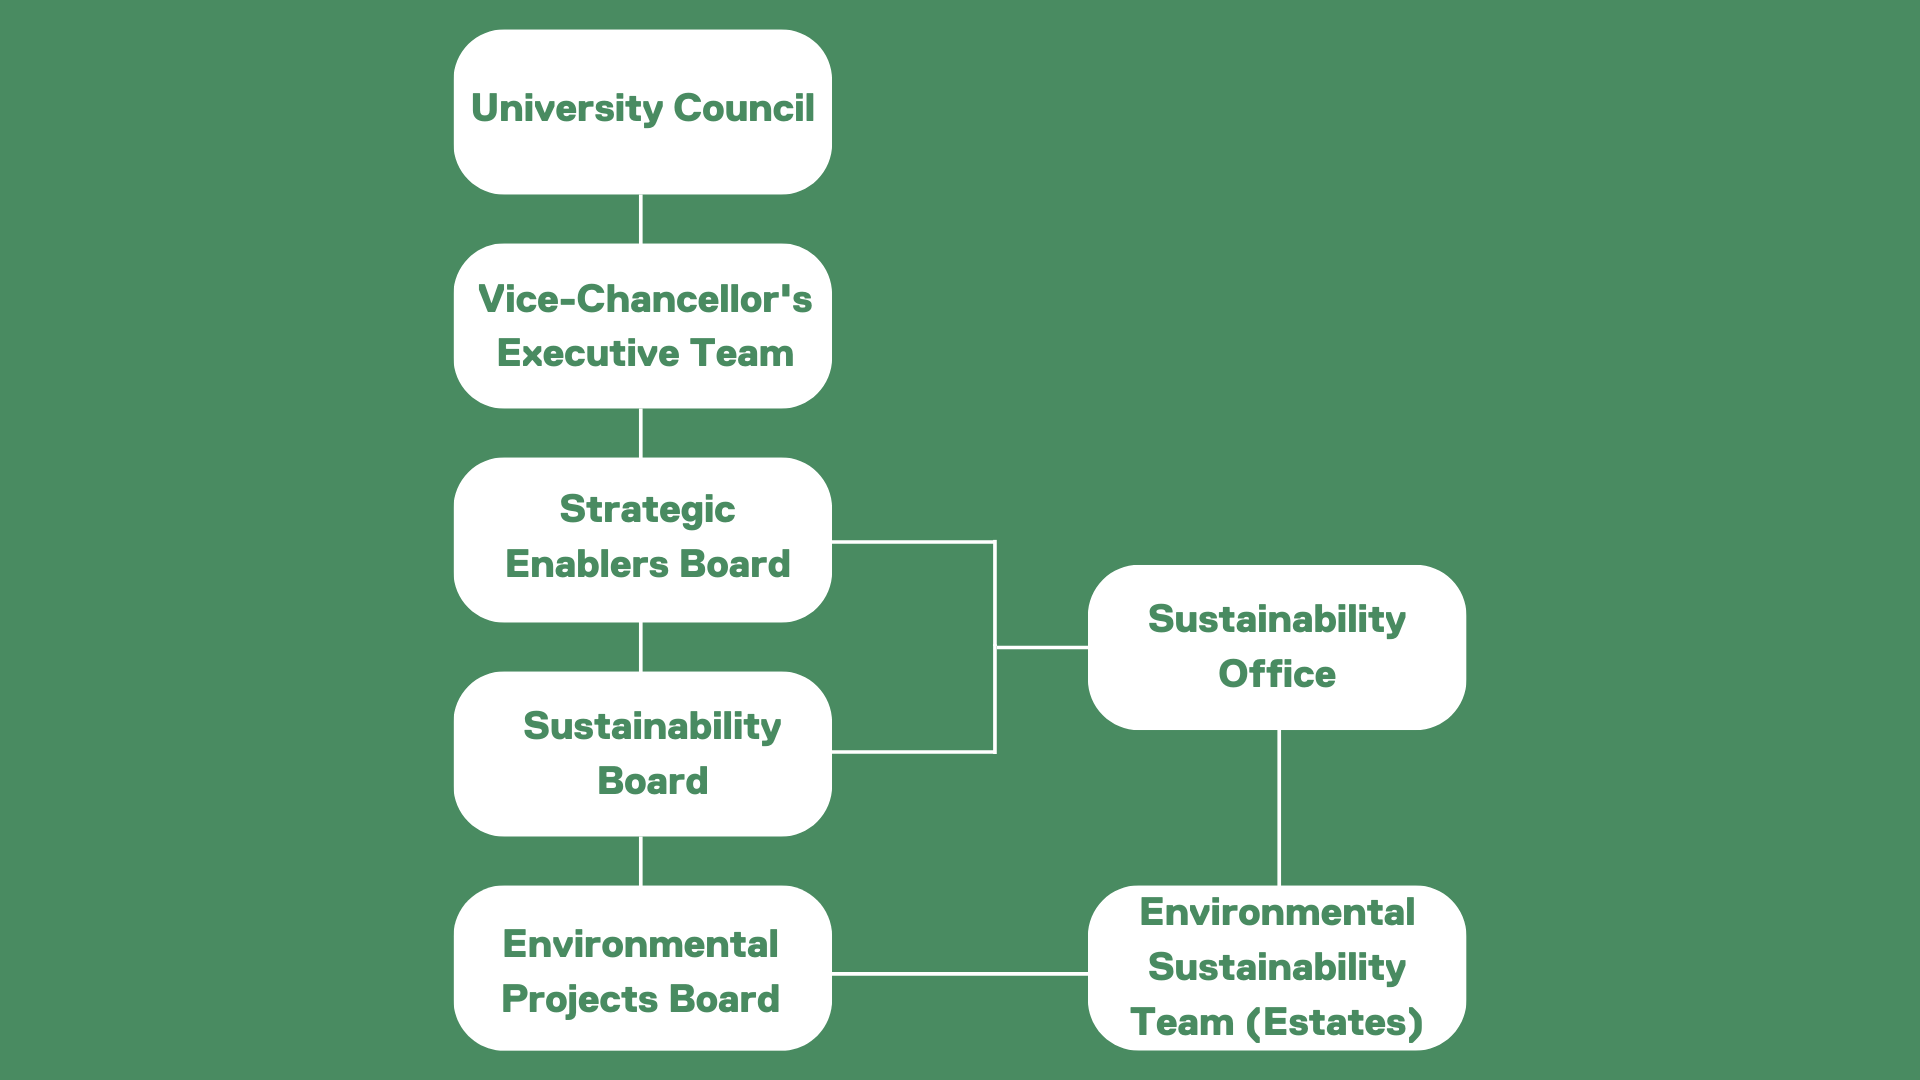 The image shows the Environmental Sustainability team reporting to the Environmental Projects Board and Sustainability Office. The Environmental Projects Board reports into the Sustainability Board who reports into Strategic Enablers Board who report into the Vice-Chancellor's Executive Team and ultimately University Council. The Sustainability Office reports into Strategic Enablers Board and Sustainability Board.